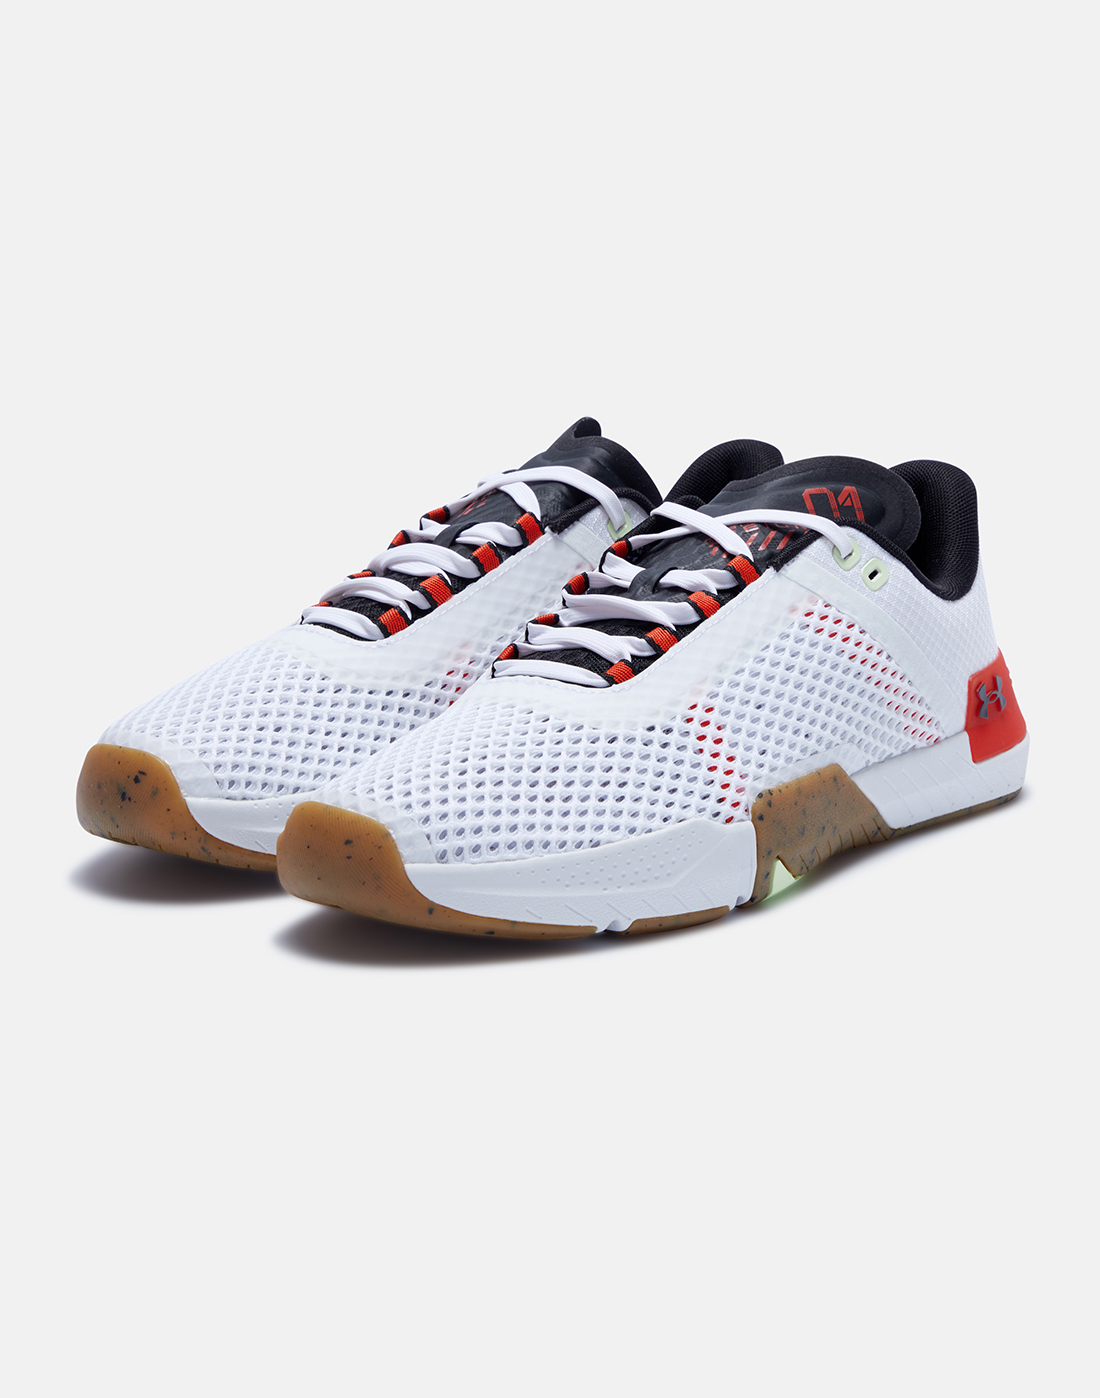 Under Armour Mens Tribase Reign 4 - White | Life Style Sports UK